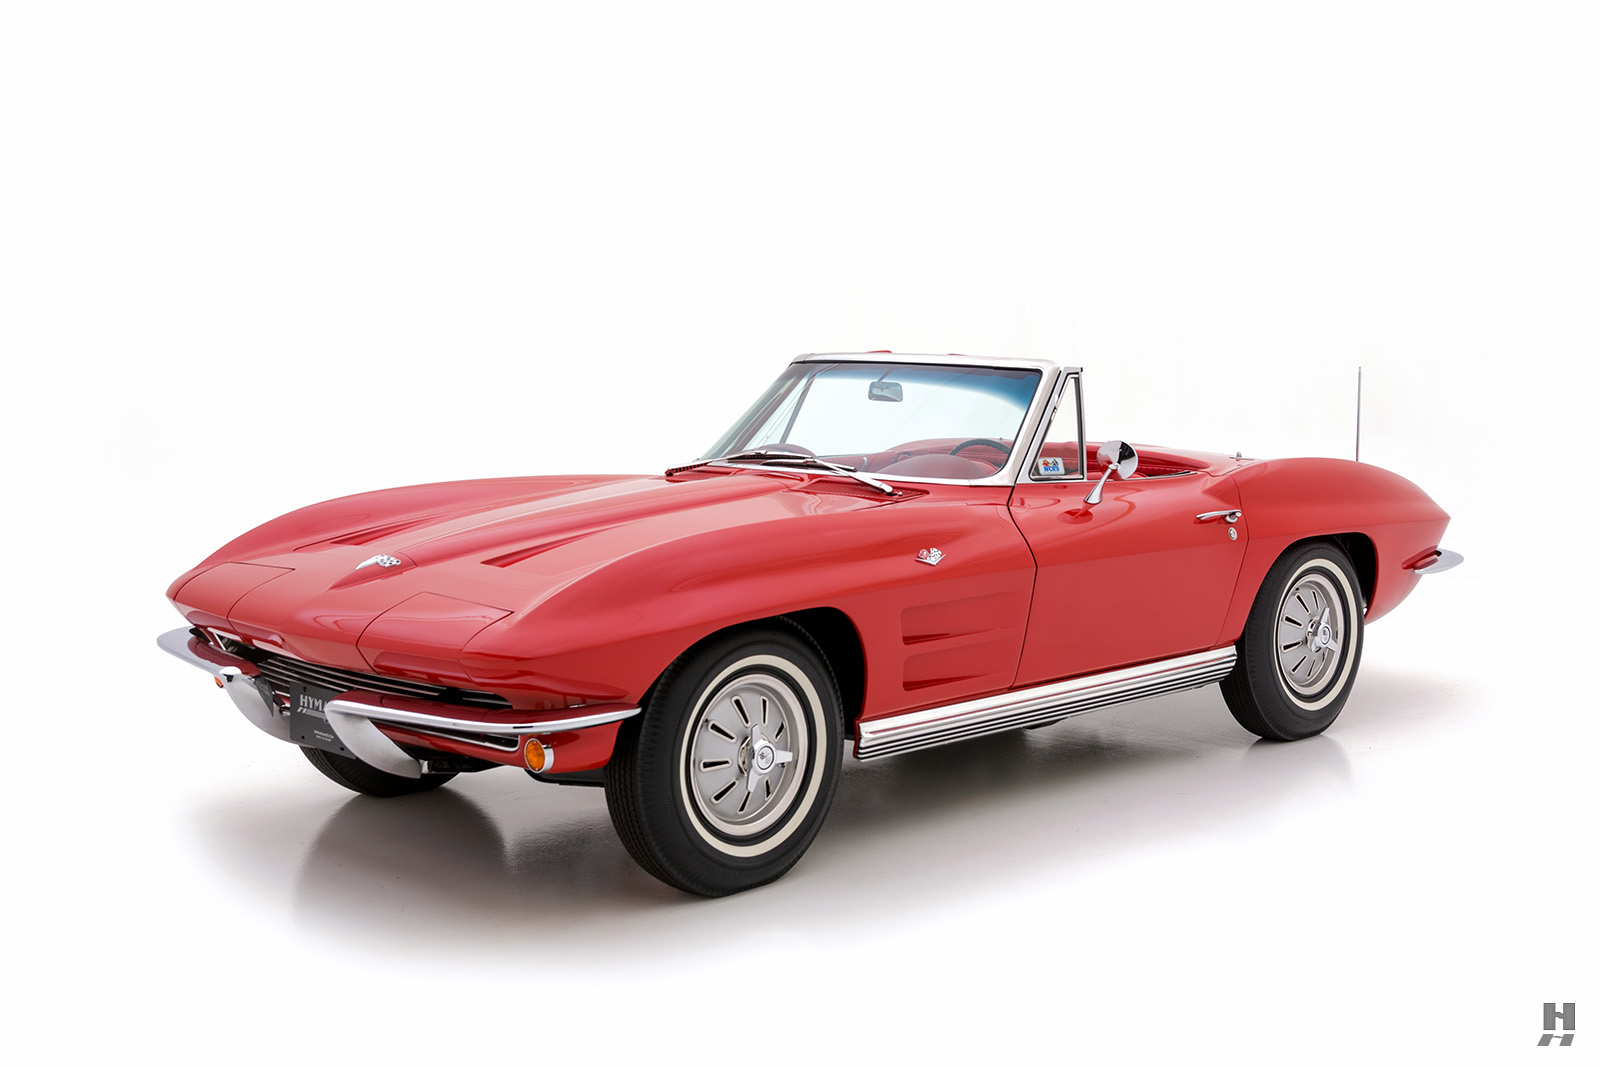 1964 Chevrolet Corvette Base | Hagerty Valuation Tools